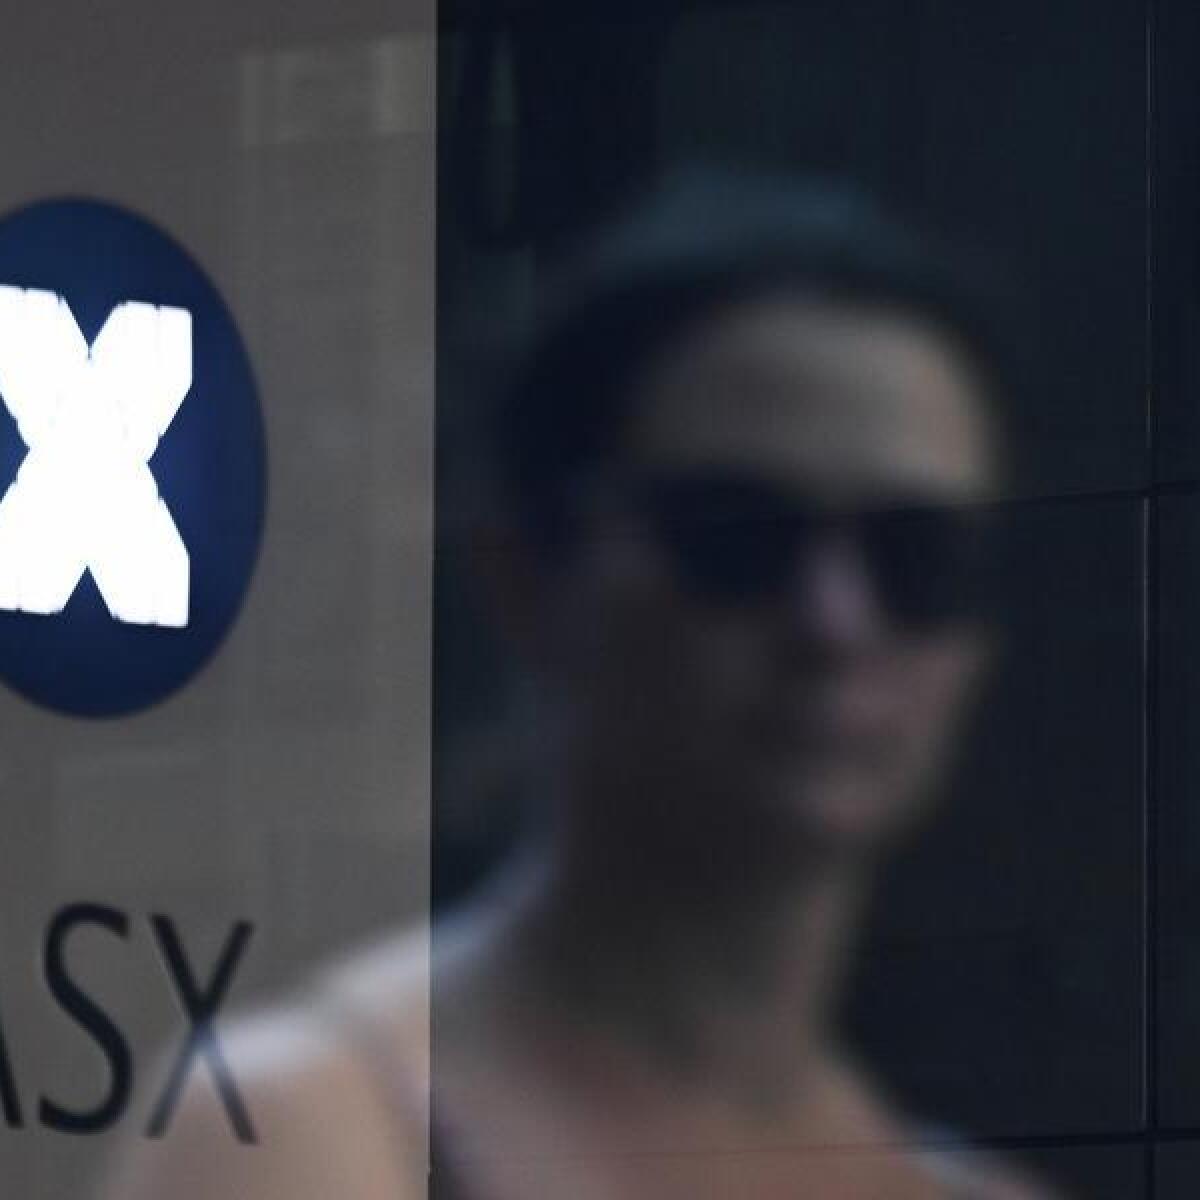 A reflection in the window of the ASX in Sydney